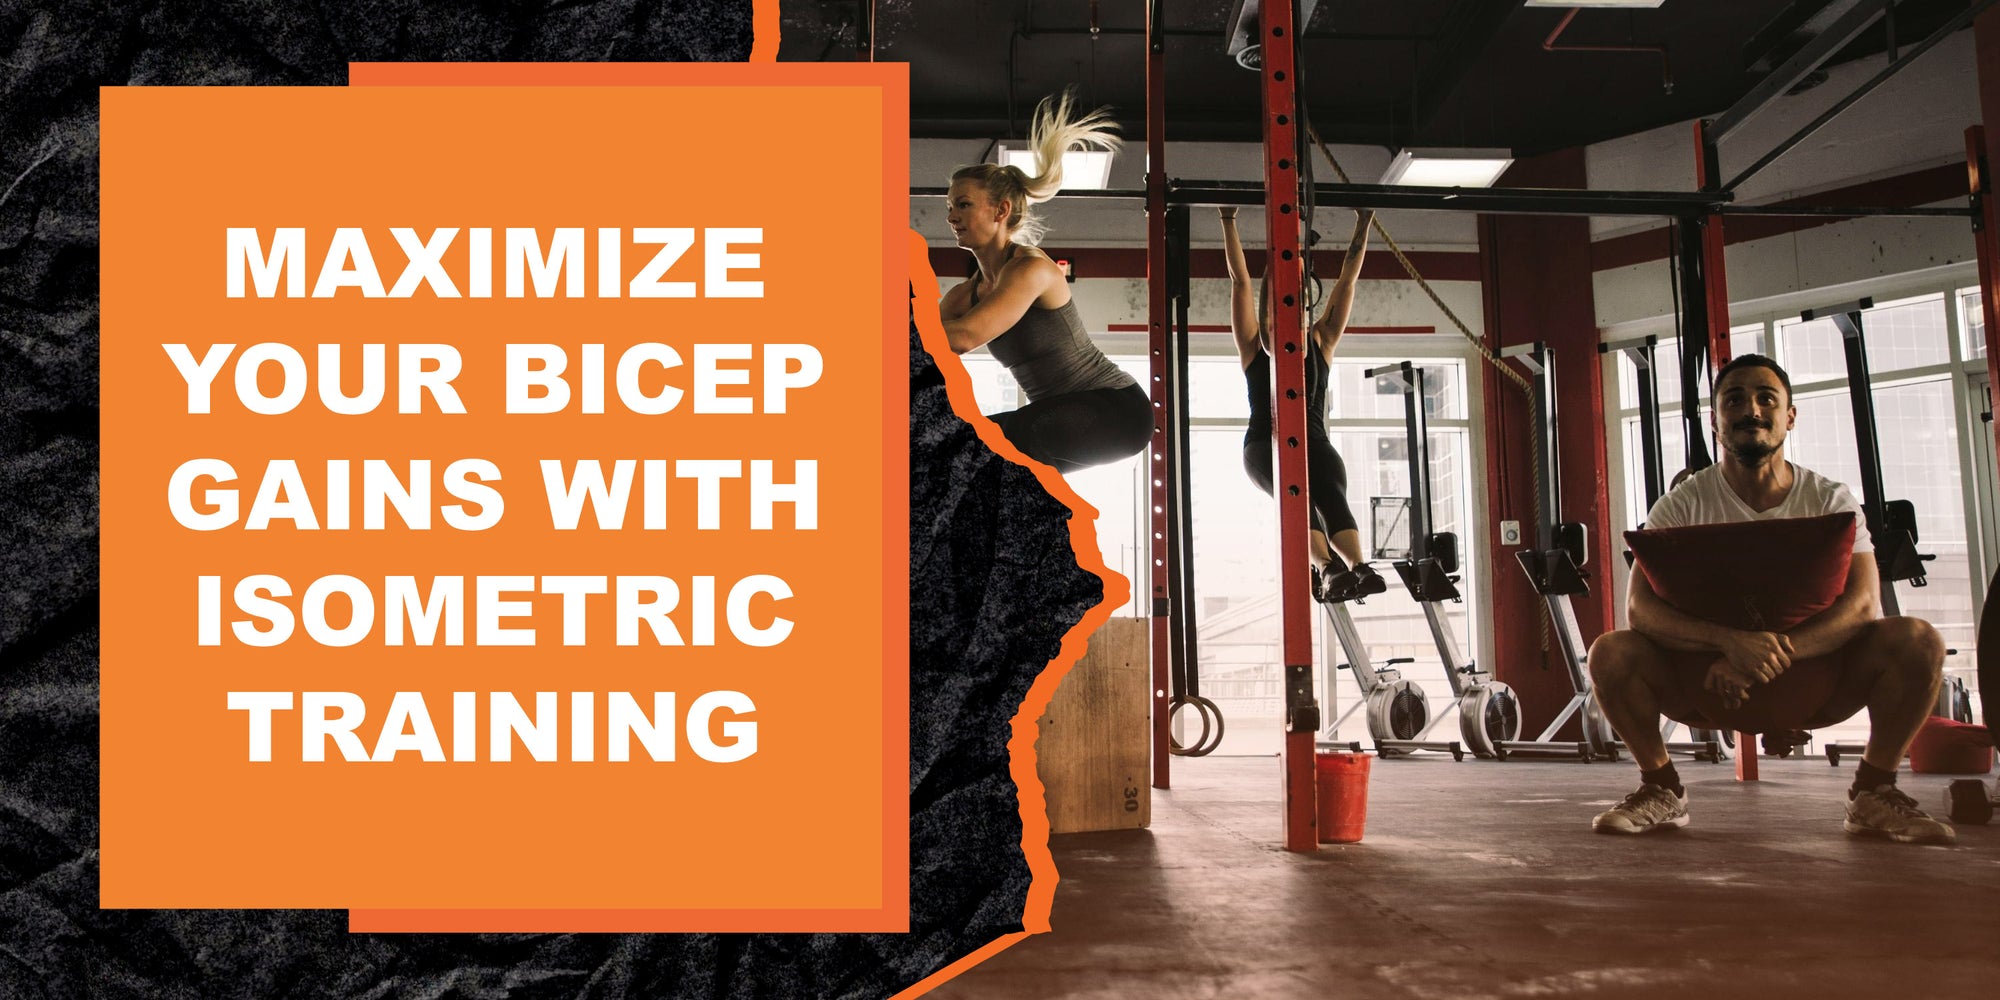 How to Maximize Your Bicep Gains with Isometric Training